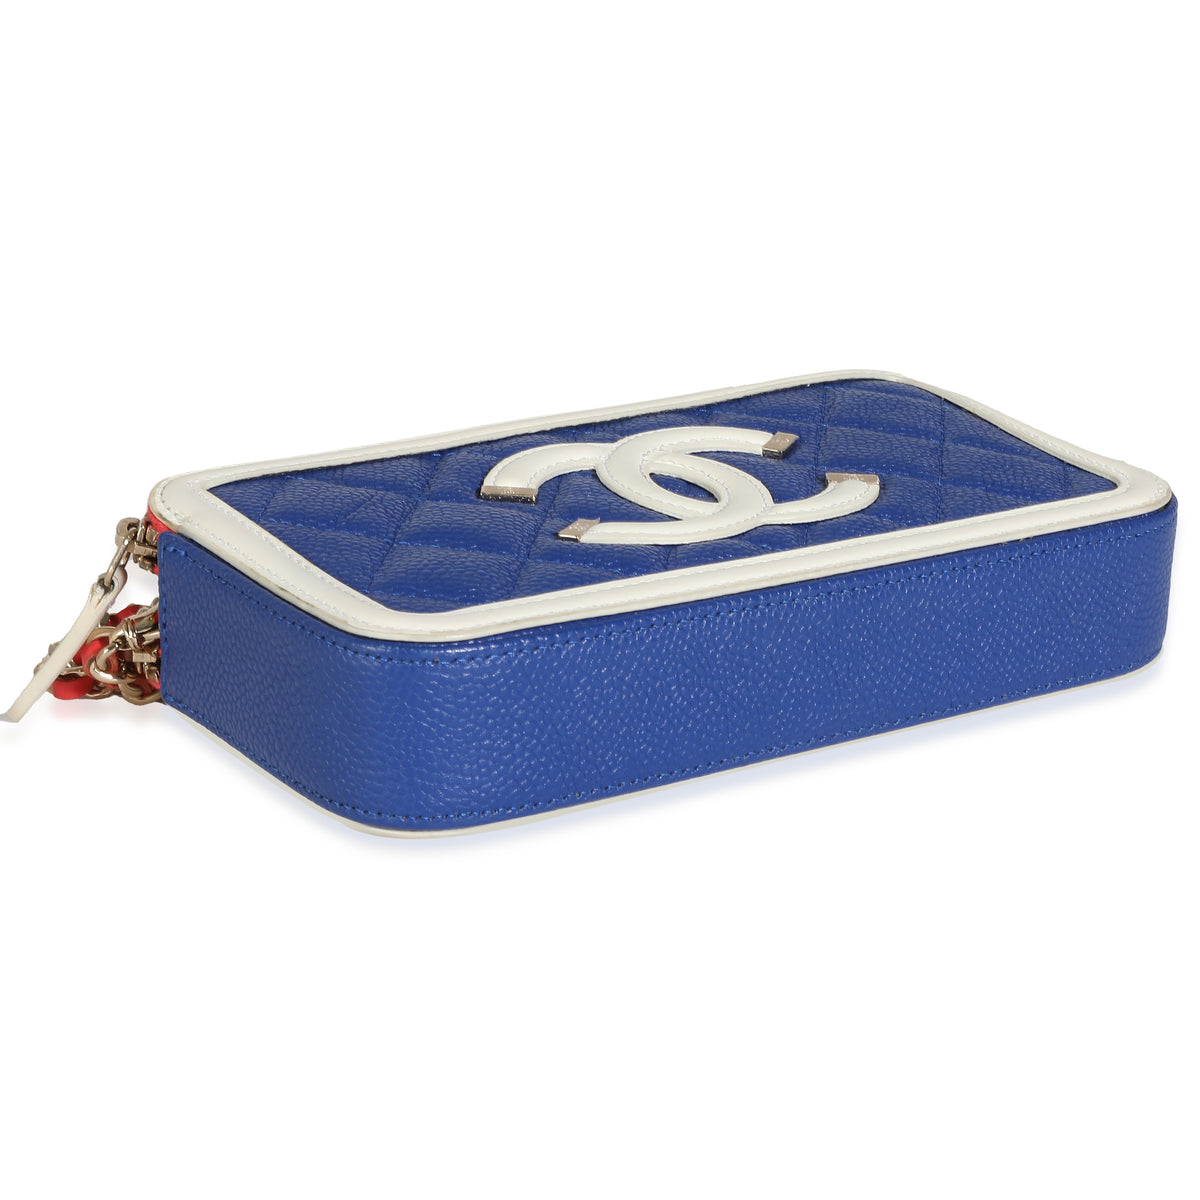 Blue White Red Quilted Caviar Double Zip Filigree Clutch